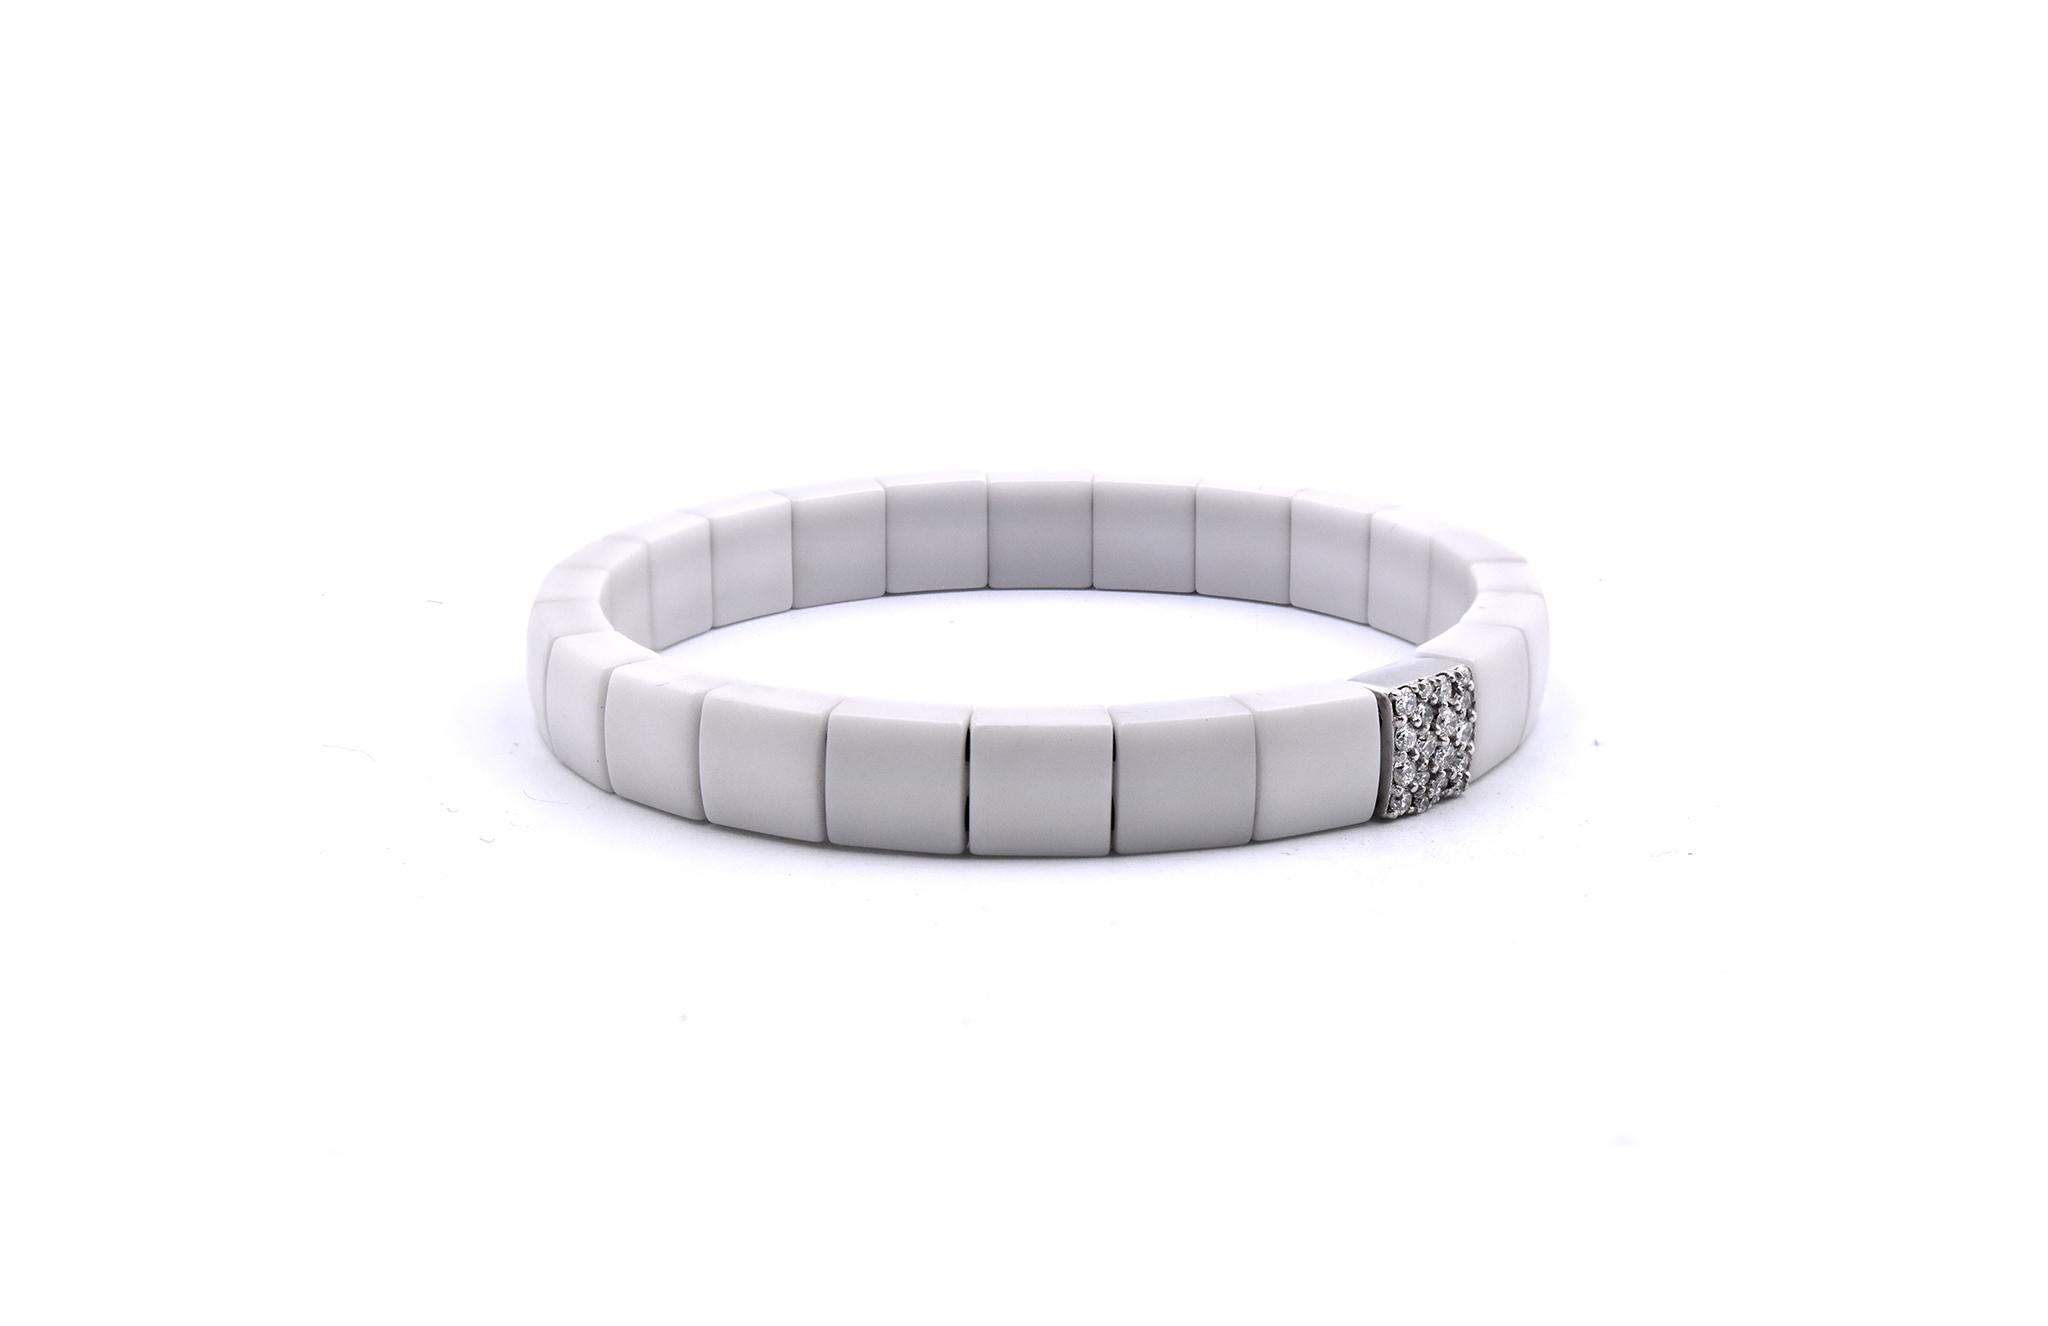 Designer: custom
Material: 18k white gold and ceramic
Diamonds: 18 round cut = .36cttw
Color: G
Clarity: VS
Dimensions: bracelet will fit a size 6 inch wrist, bracelet is 7.83mm wide
Weight: 31.72 grams
